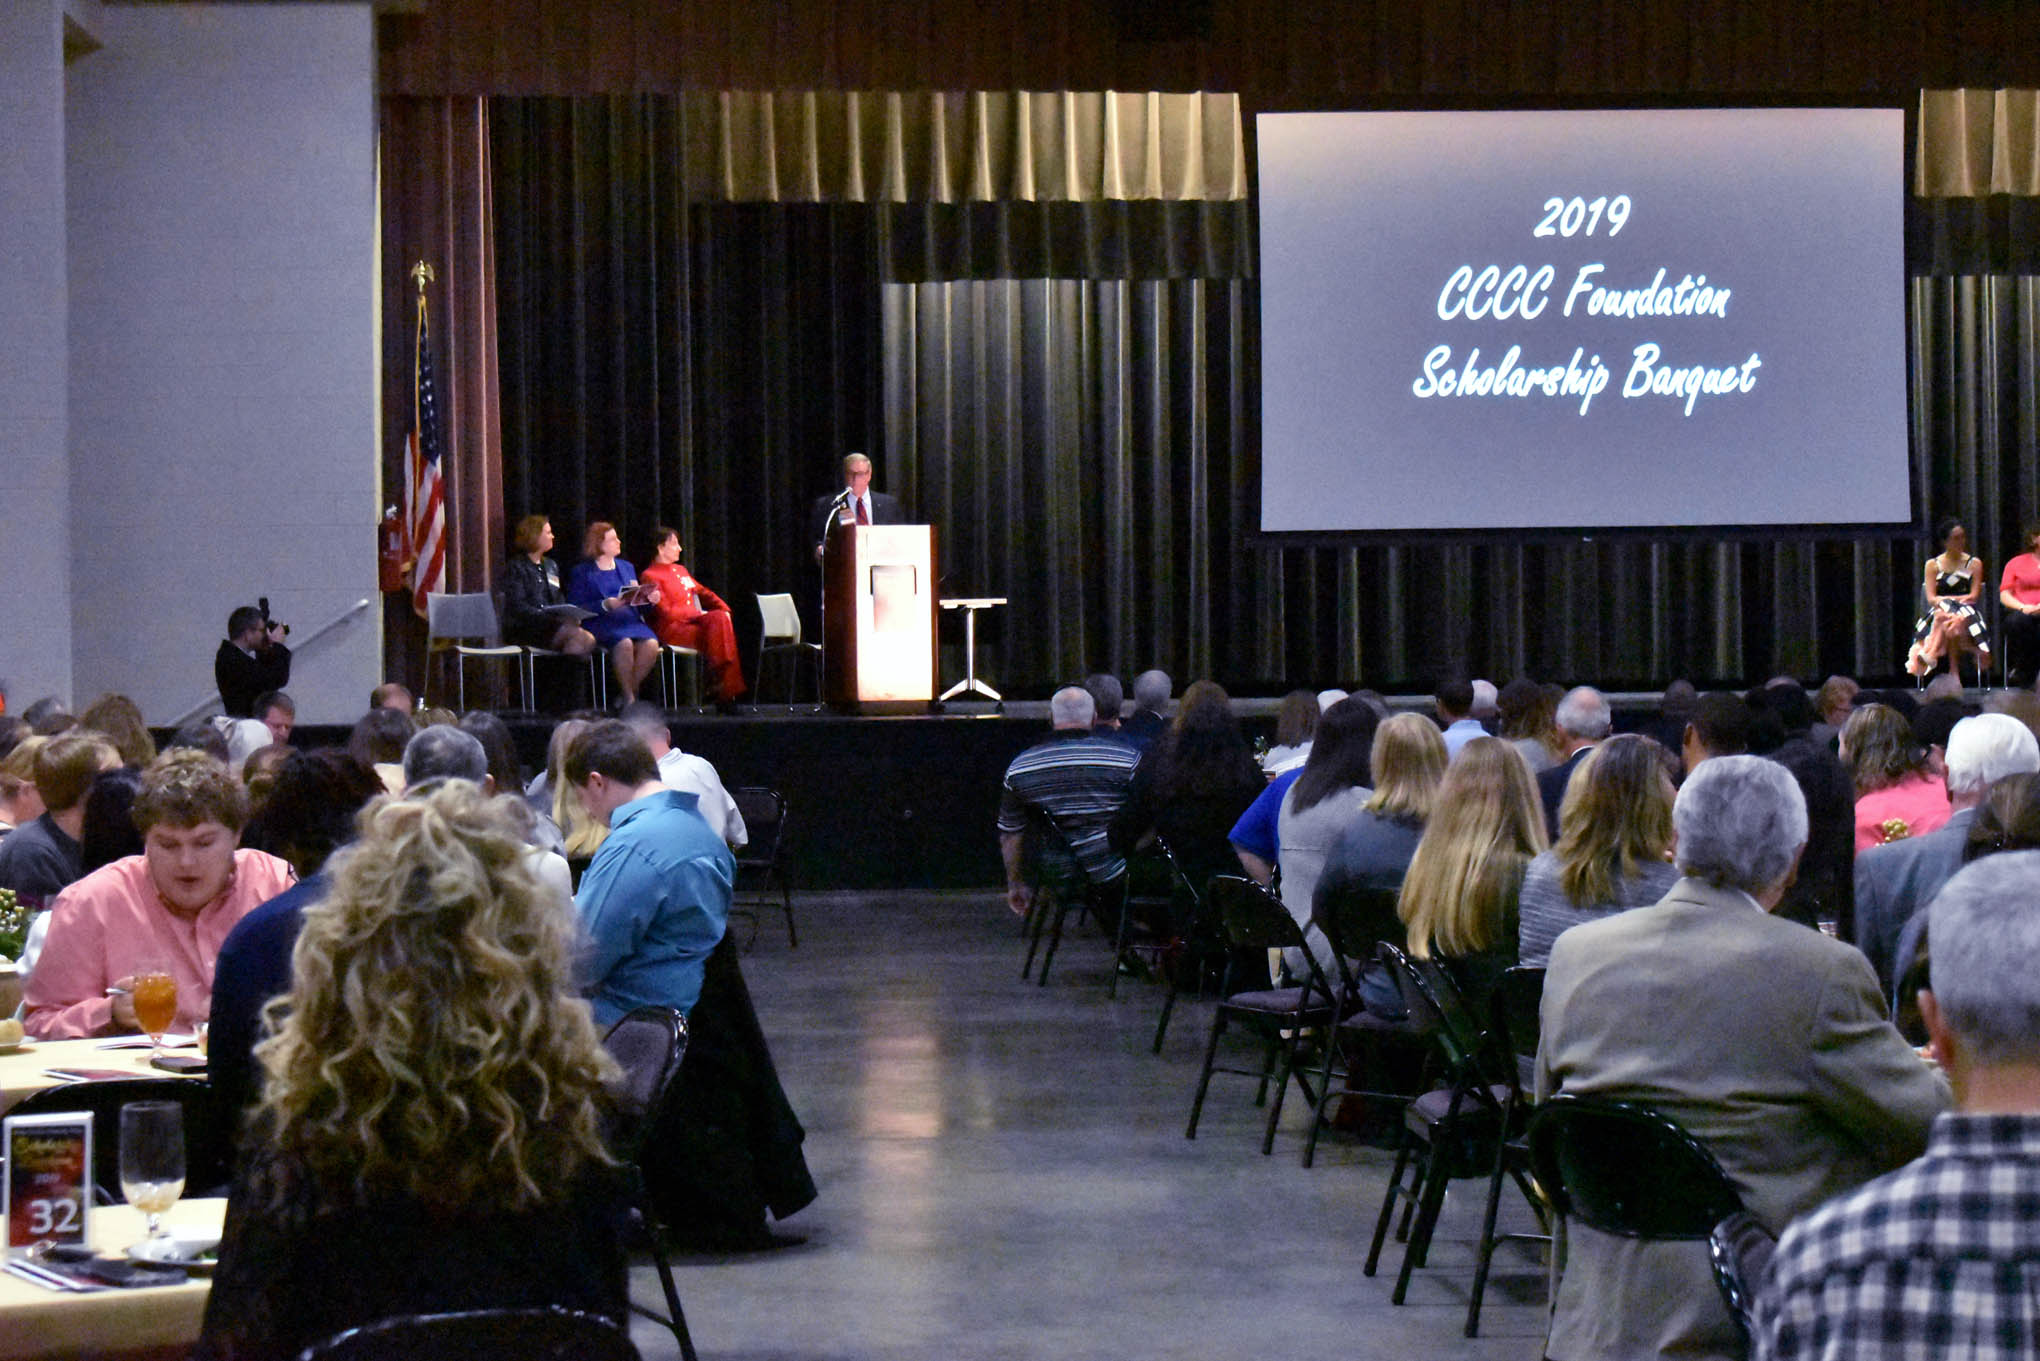 Read the full story, CCCC Foundation honors donors, scholarship recipients